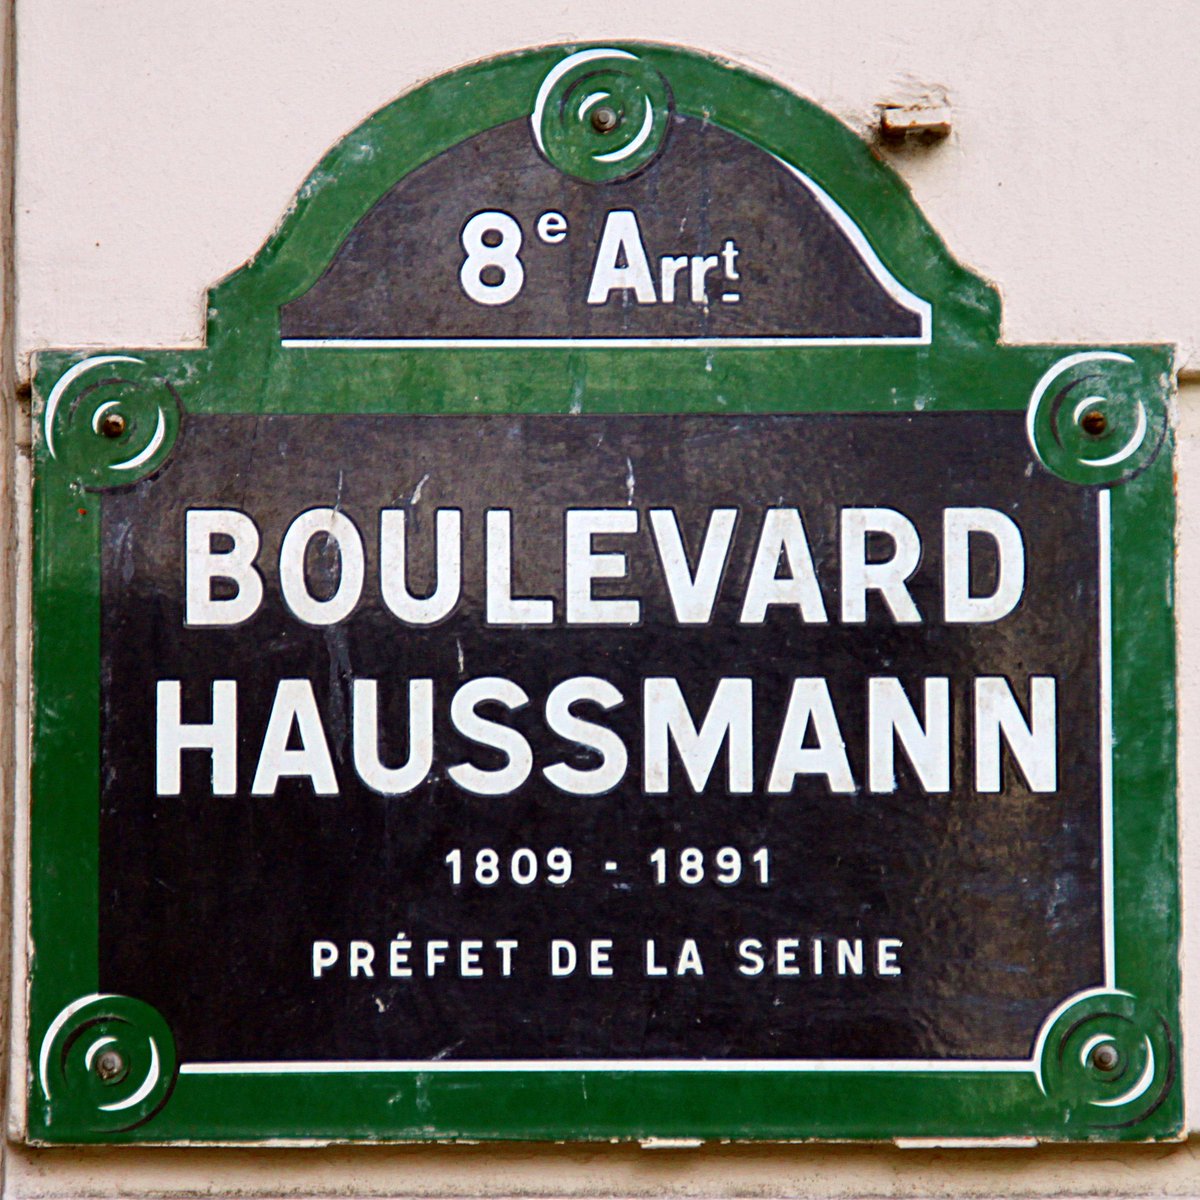 The system, put in place by Baron Haussmann, ensured Parisian streets could stay clean without wasting treated potable water.